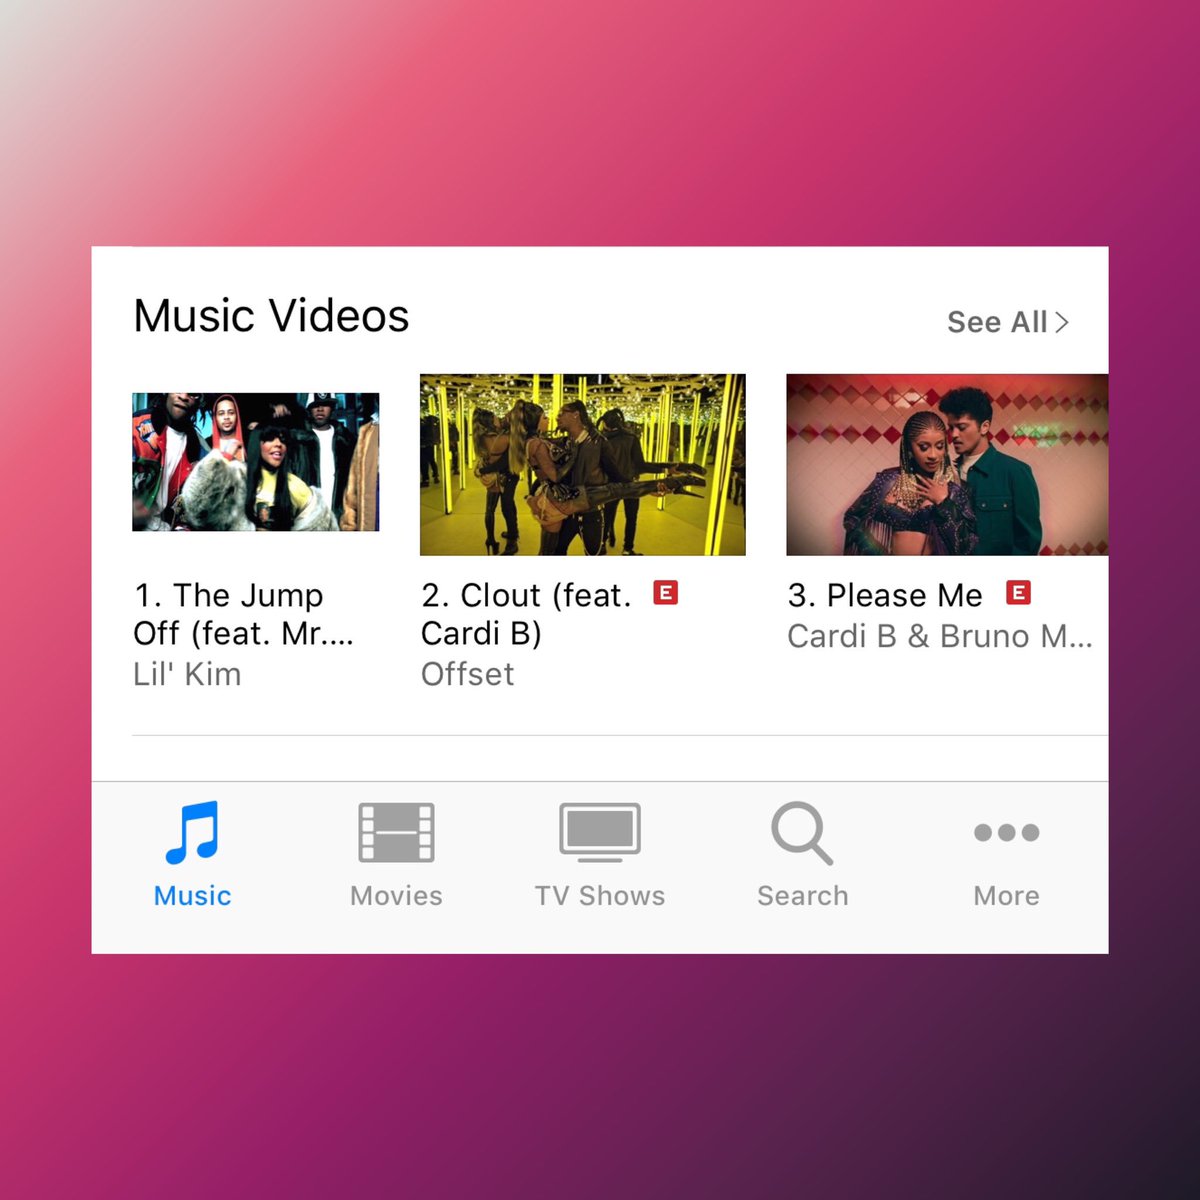 This is craaazzzyyyy!! Okkk I see you Jesus!! Happy Easter!! ???? #1 music video on iTunes right now!! #blessed https://t.co/95657pQi43